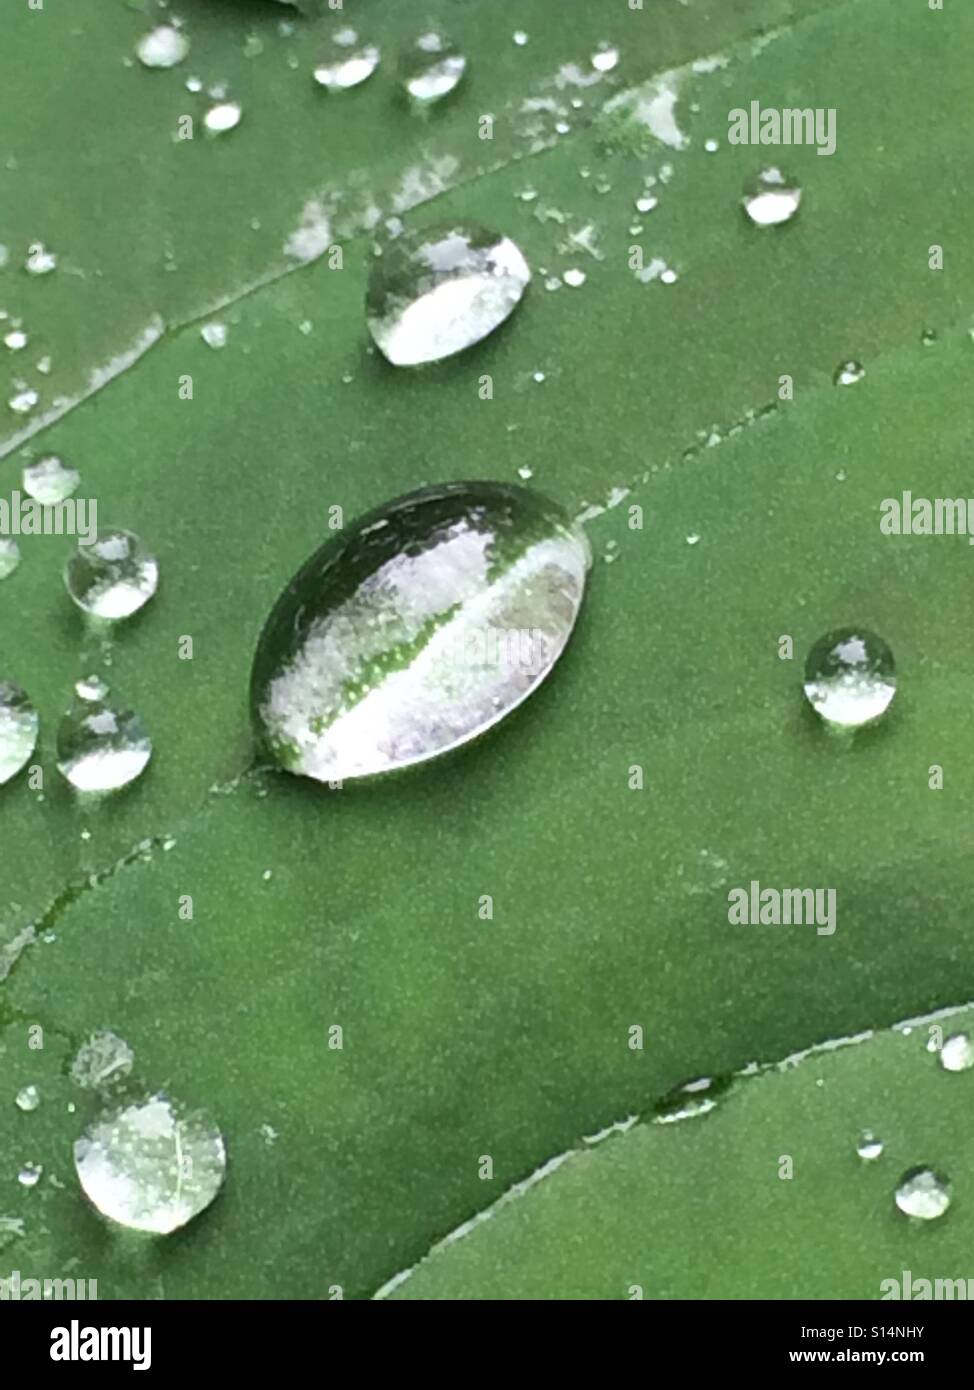 A large droplet of rain water on a leaf. Stock Photo